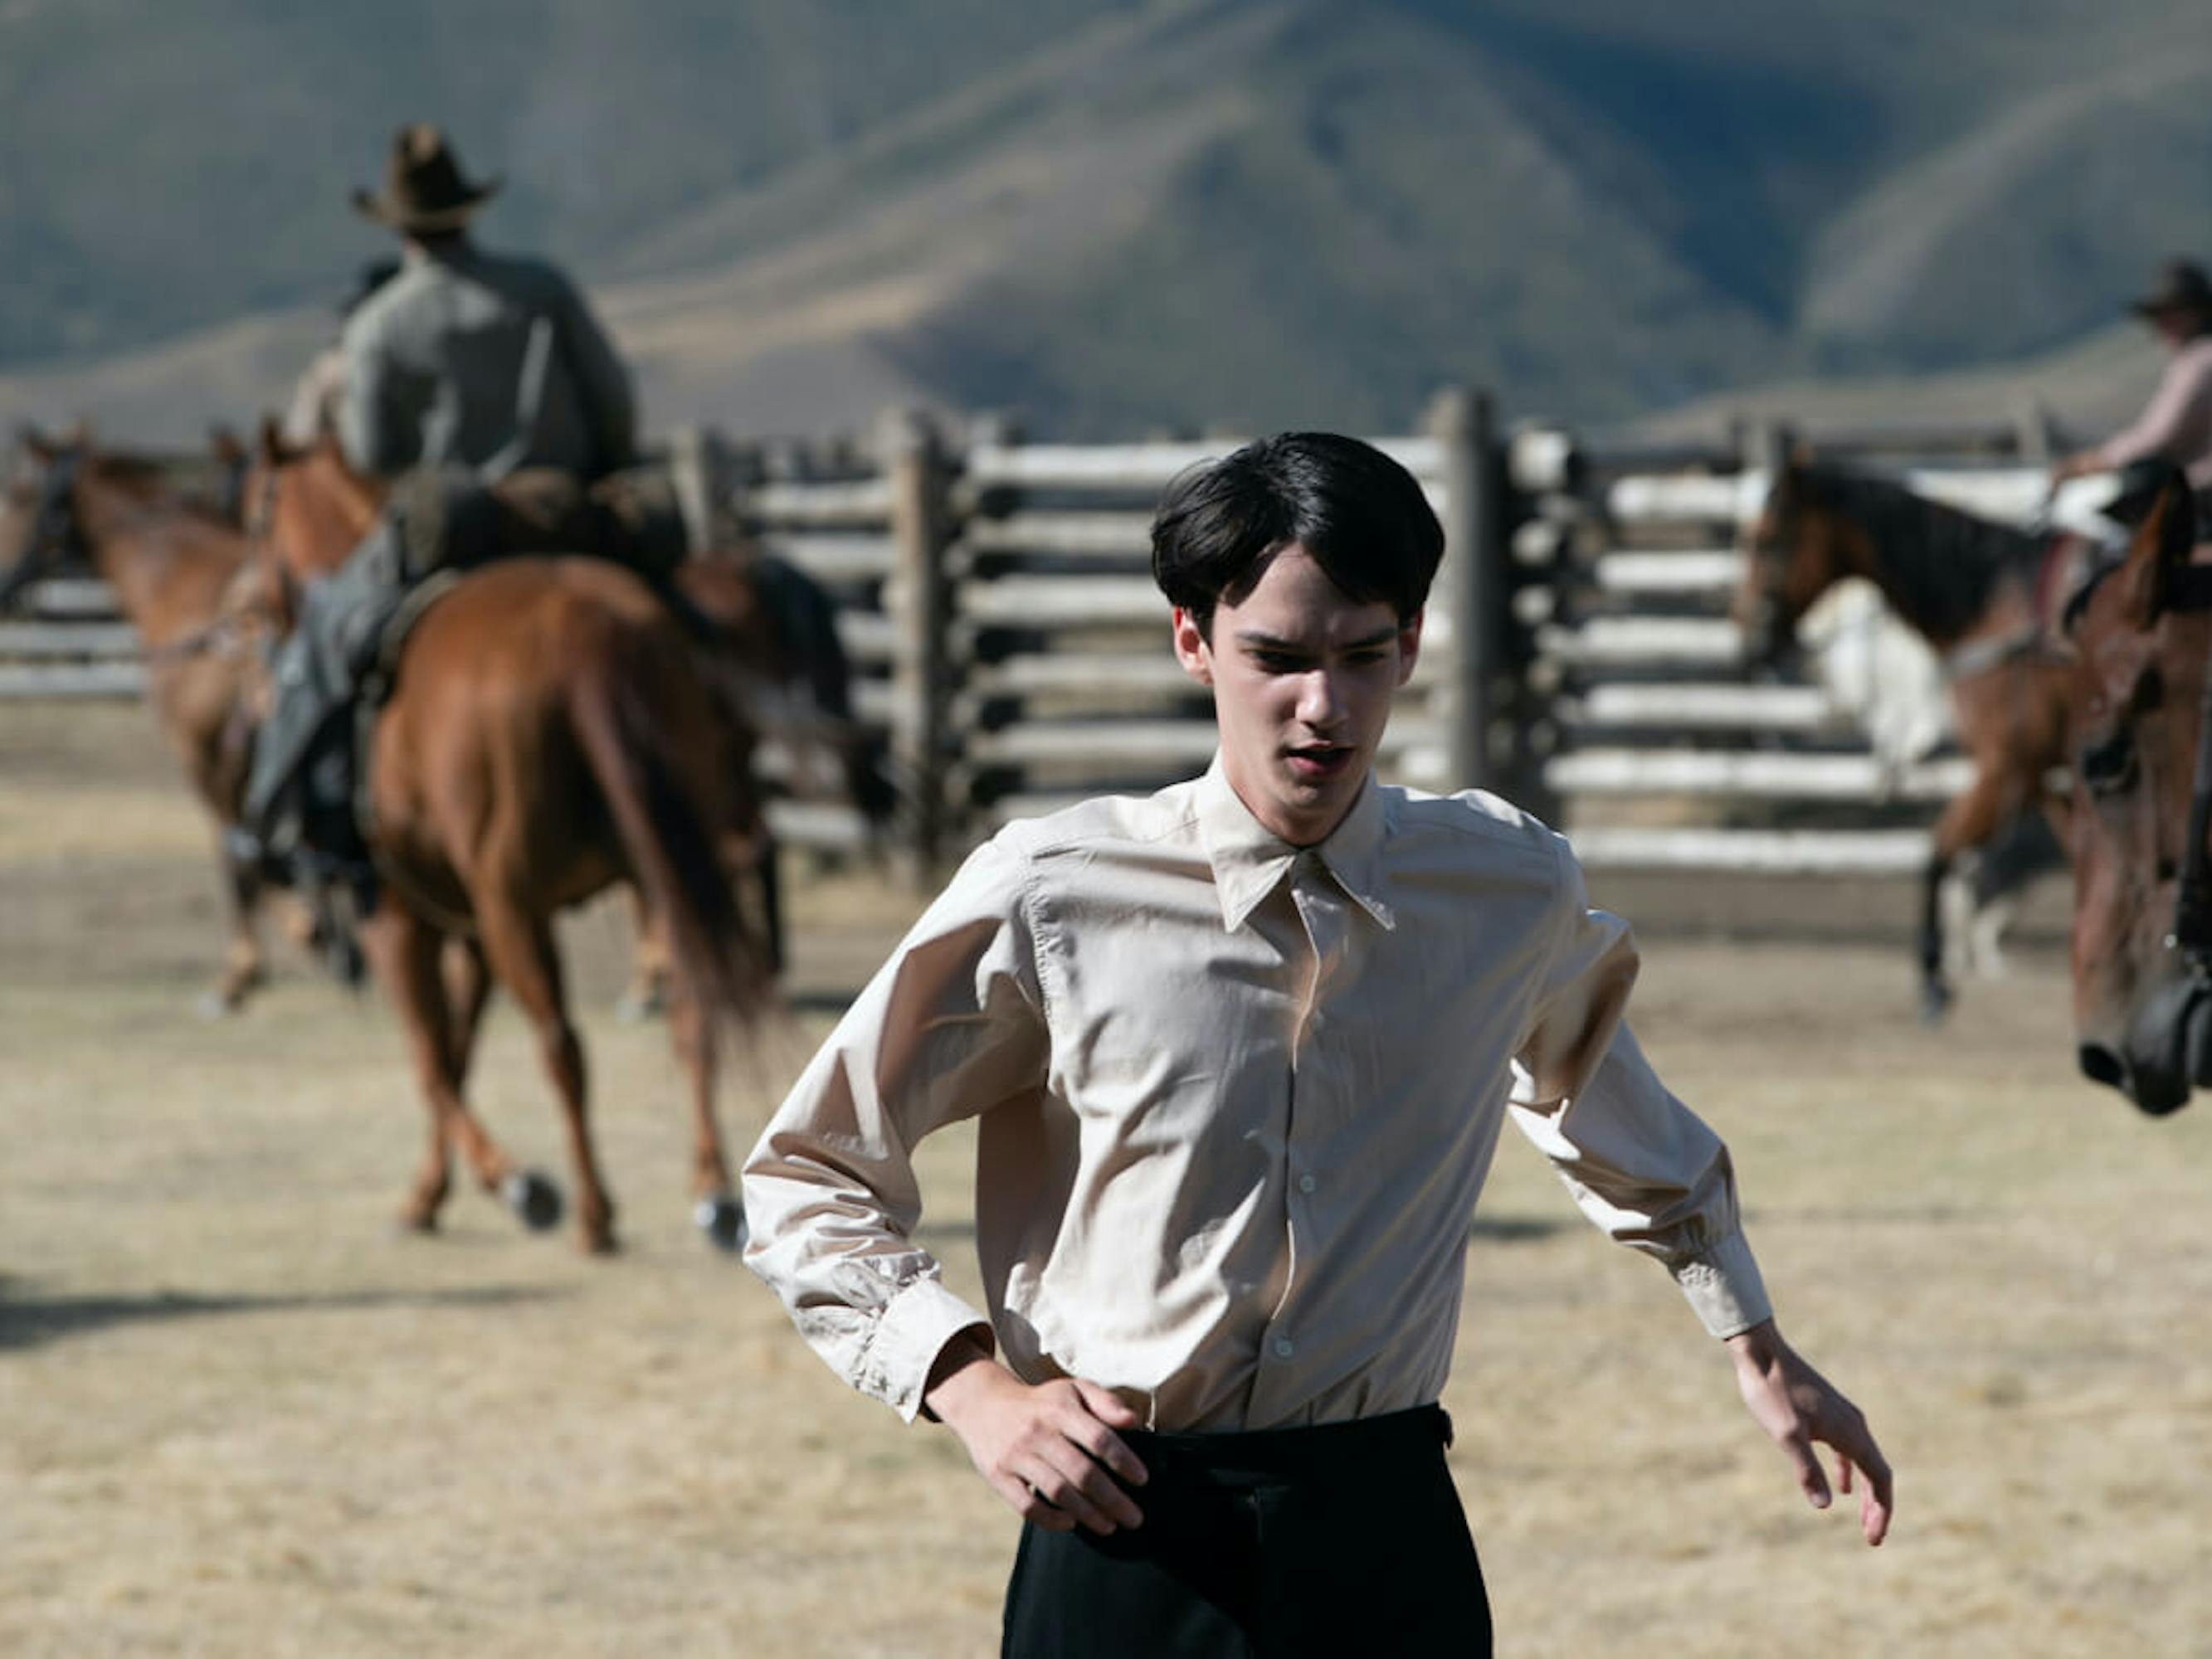 Peter (Kodi Smit-McPhee) wears a white shirt and dark pants as he runs in a fenced in area. In the background are expansive mountains, and men riding beautiful brown horses.